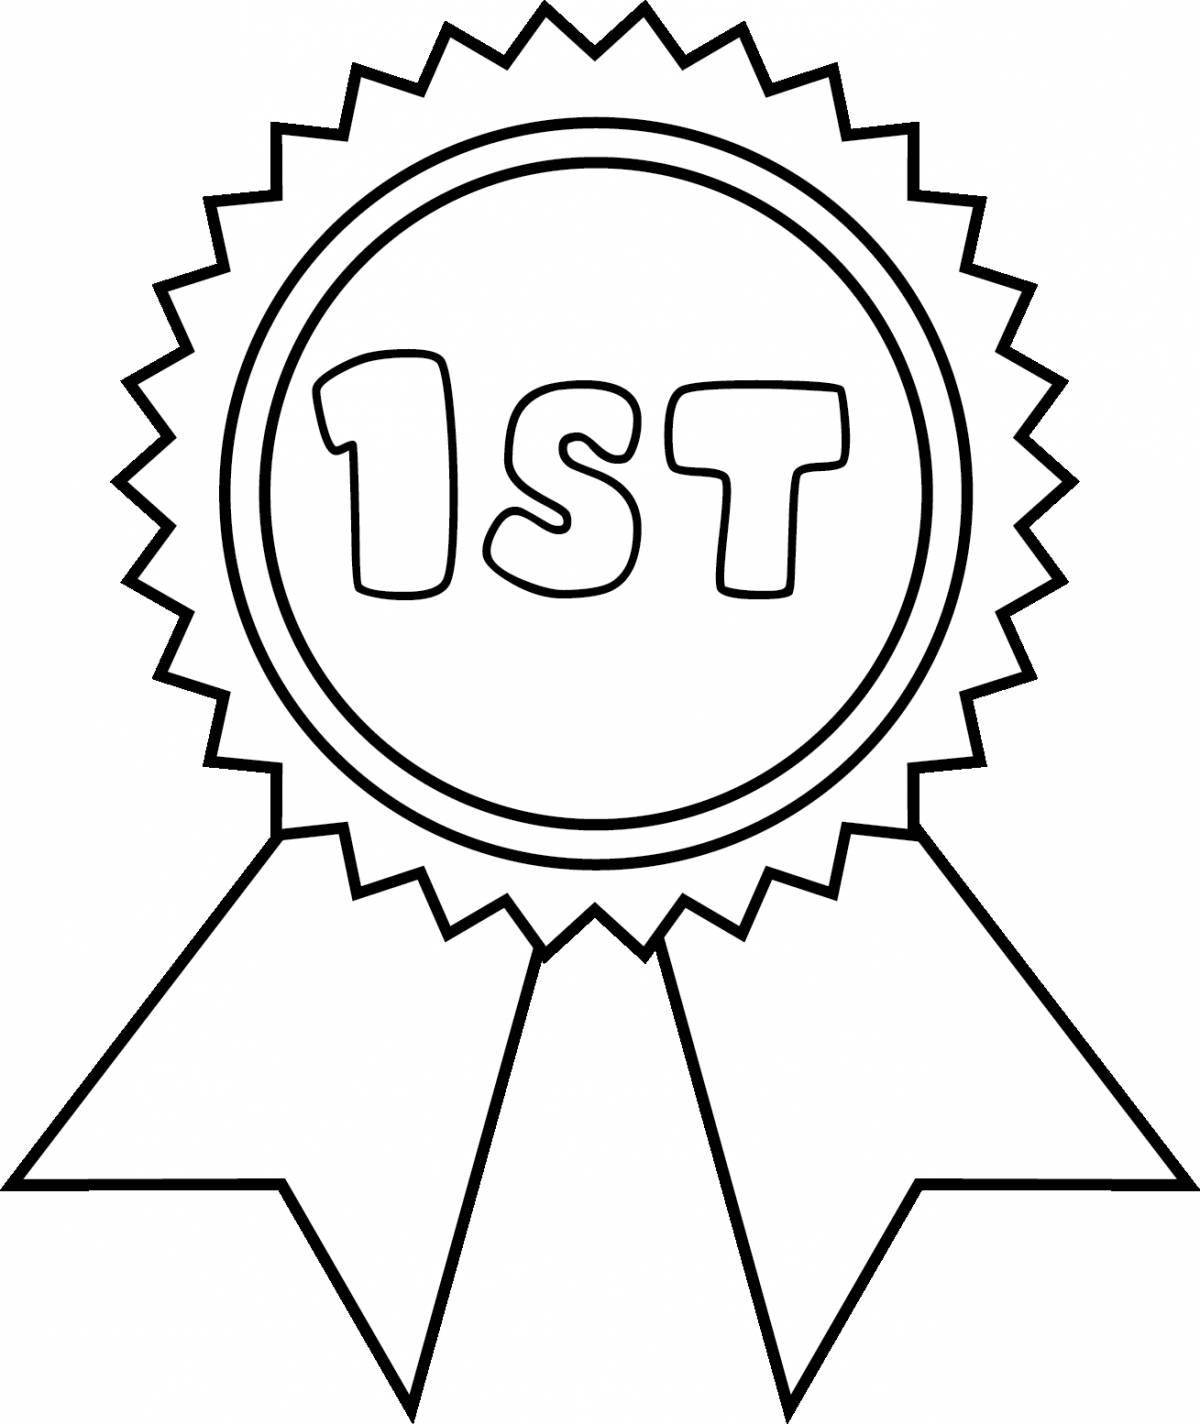 Playful medal template for February 23rd